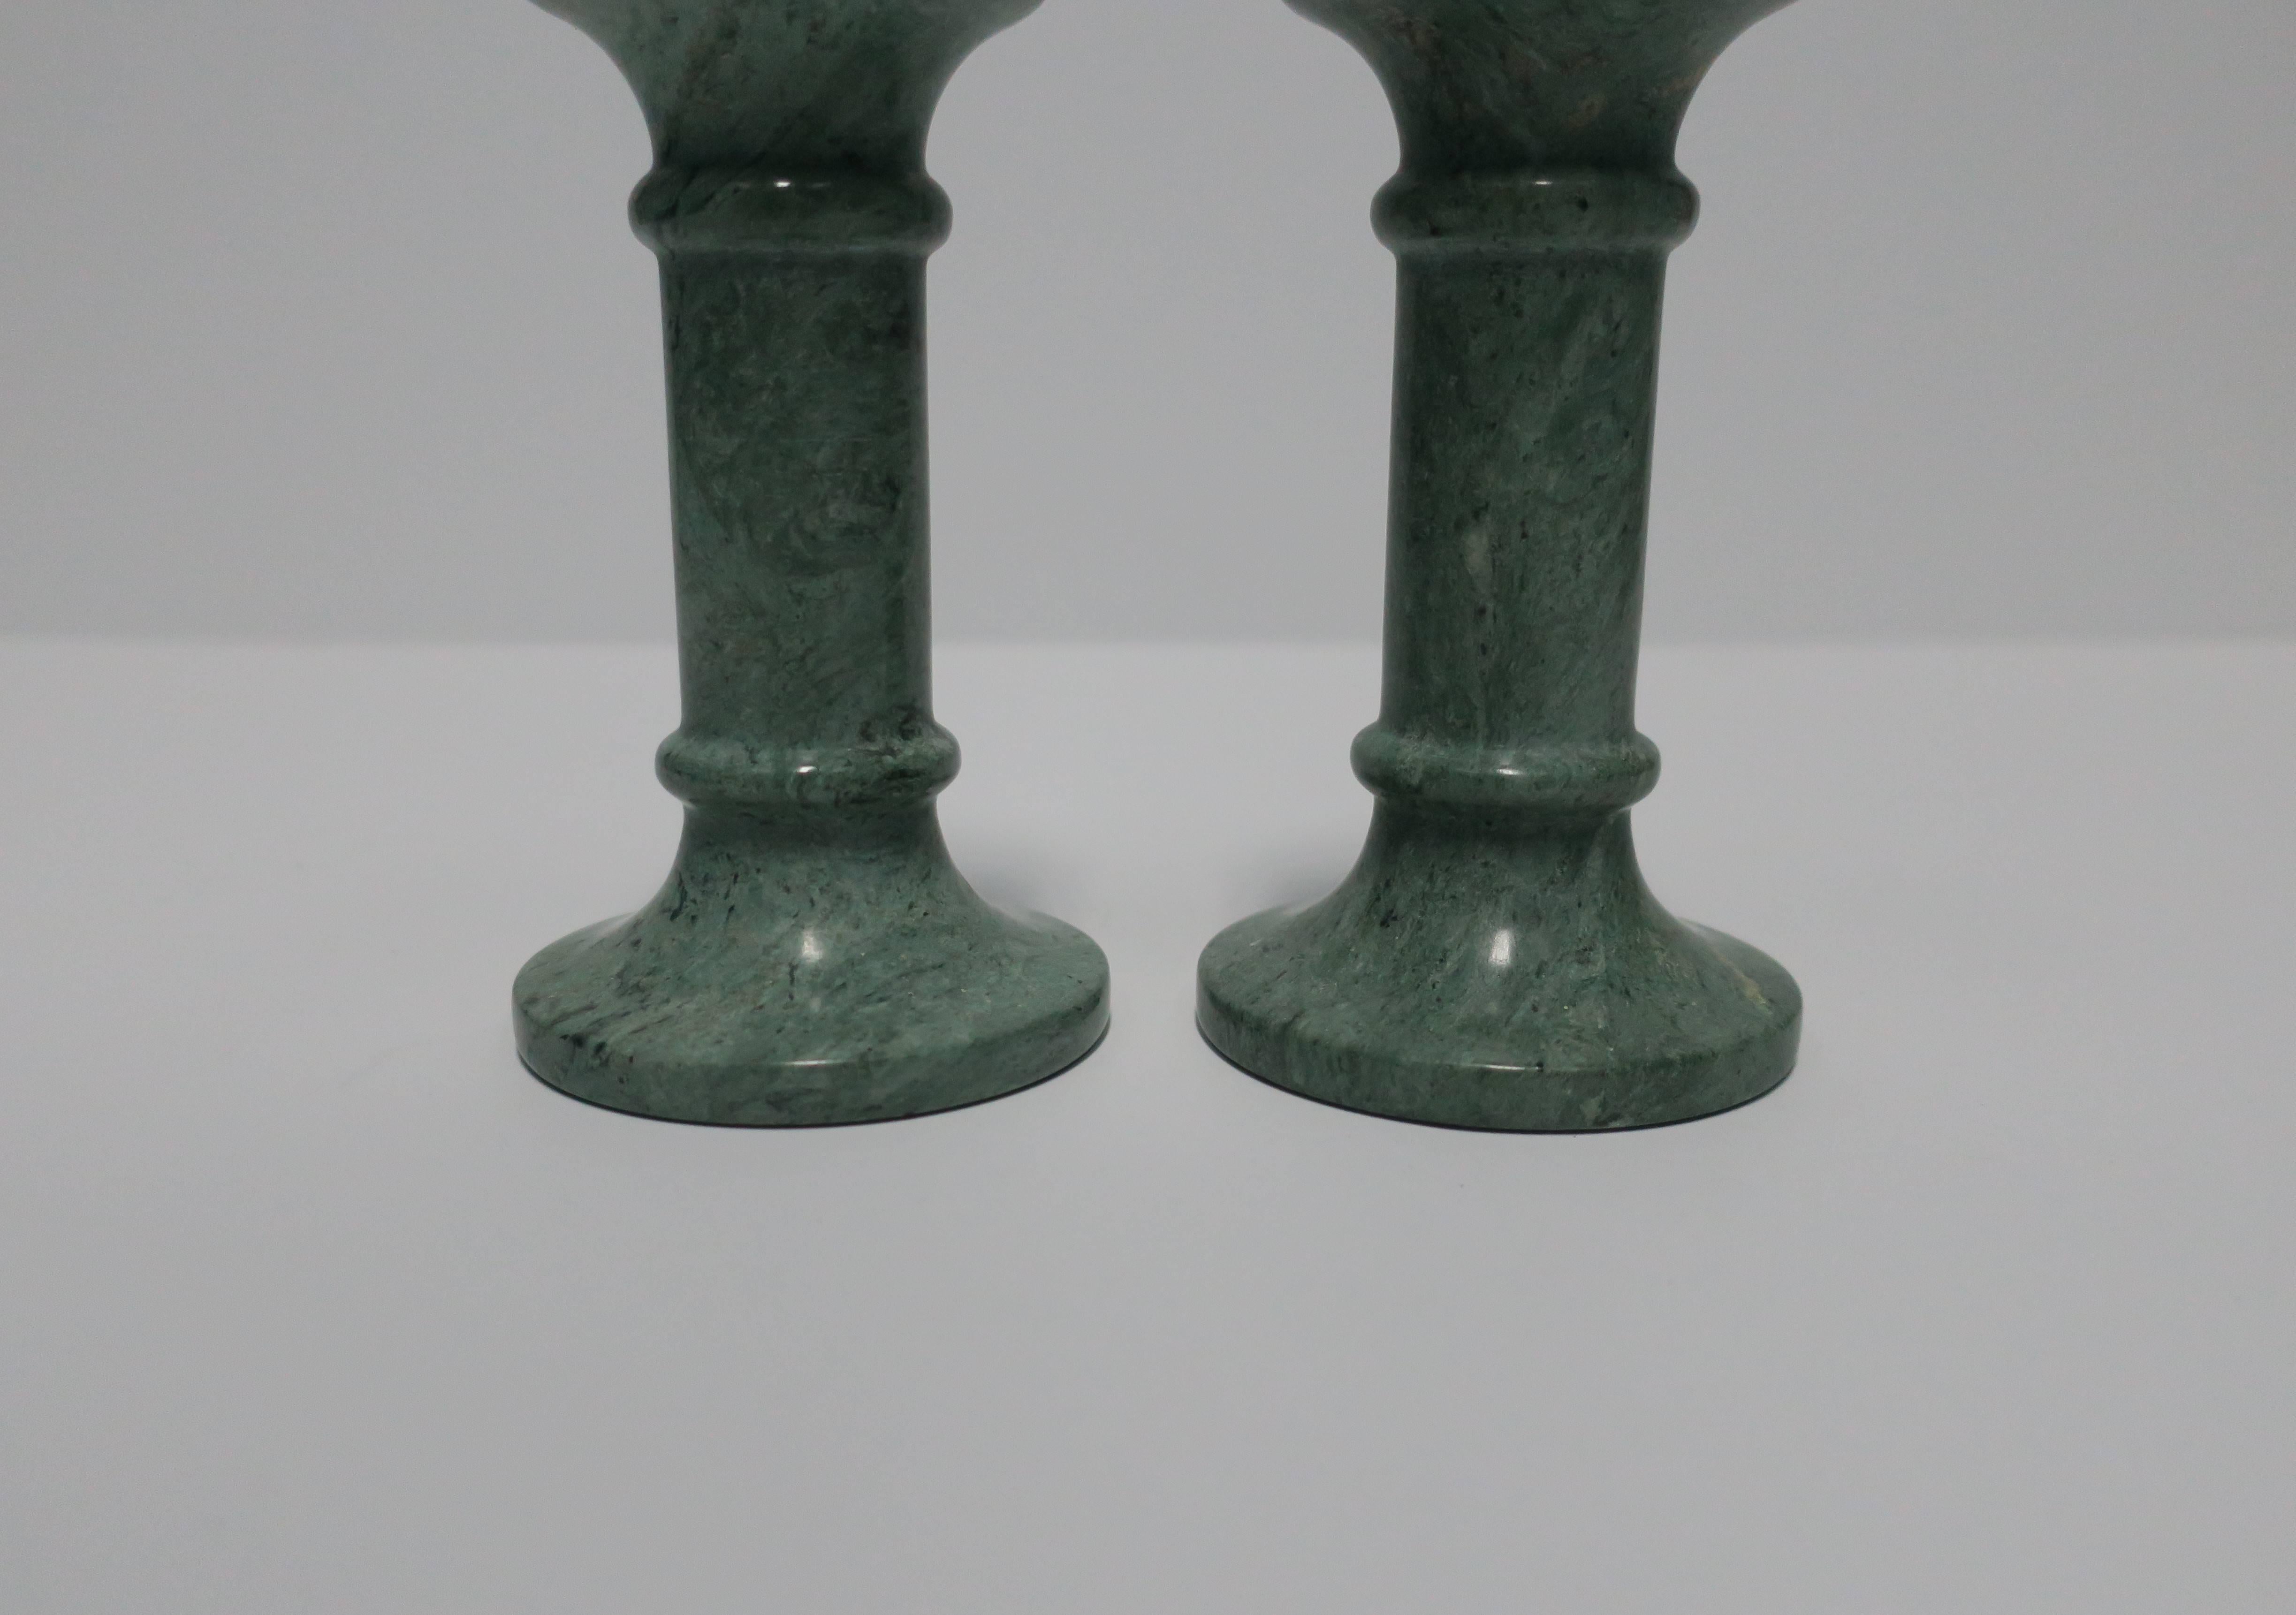 Polished Dark Green Marble Candlestick Holders, Pair